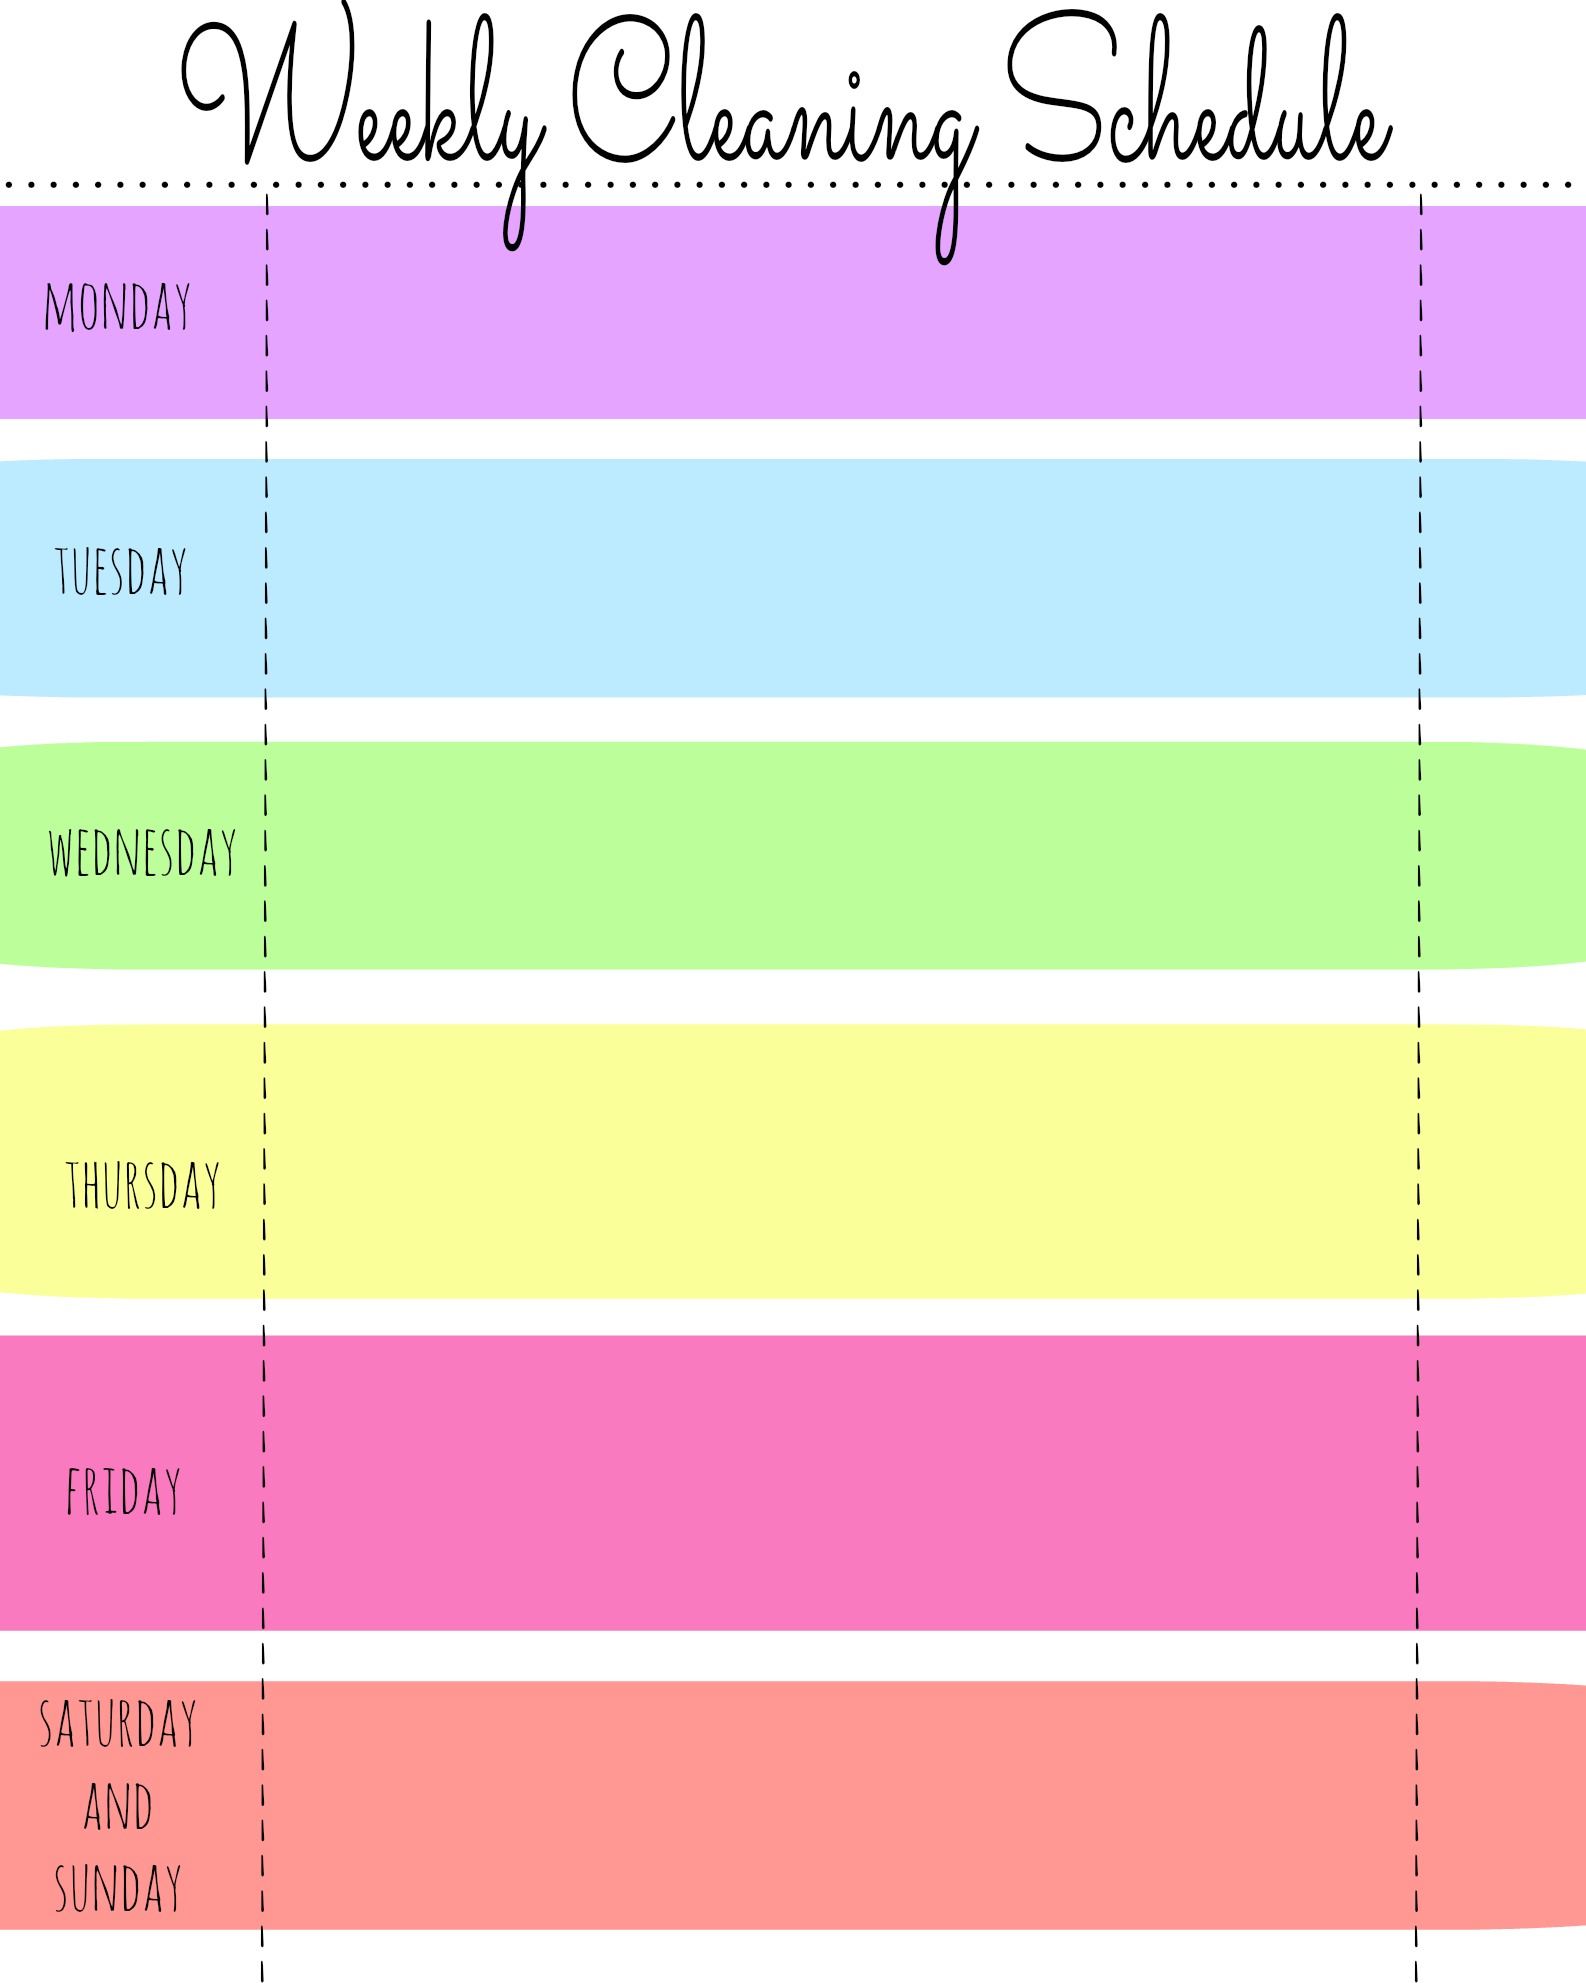 My Quirky Weekly Cleaning Chart: Free Printable - First Home Love Life For Blank Cleaning Schedule Template